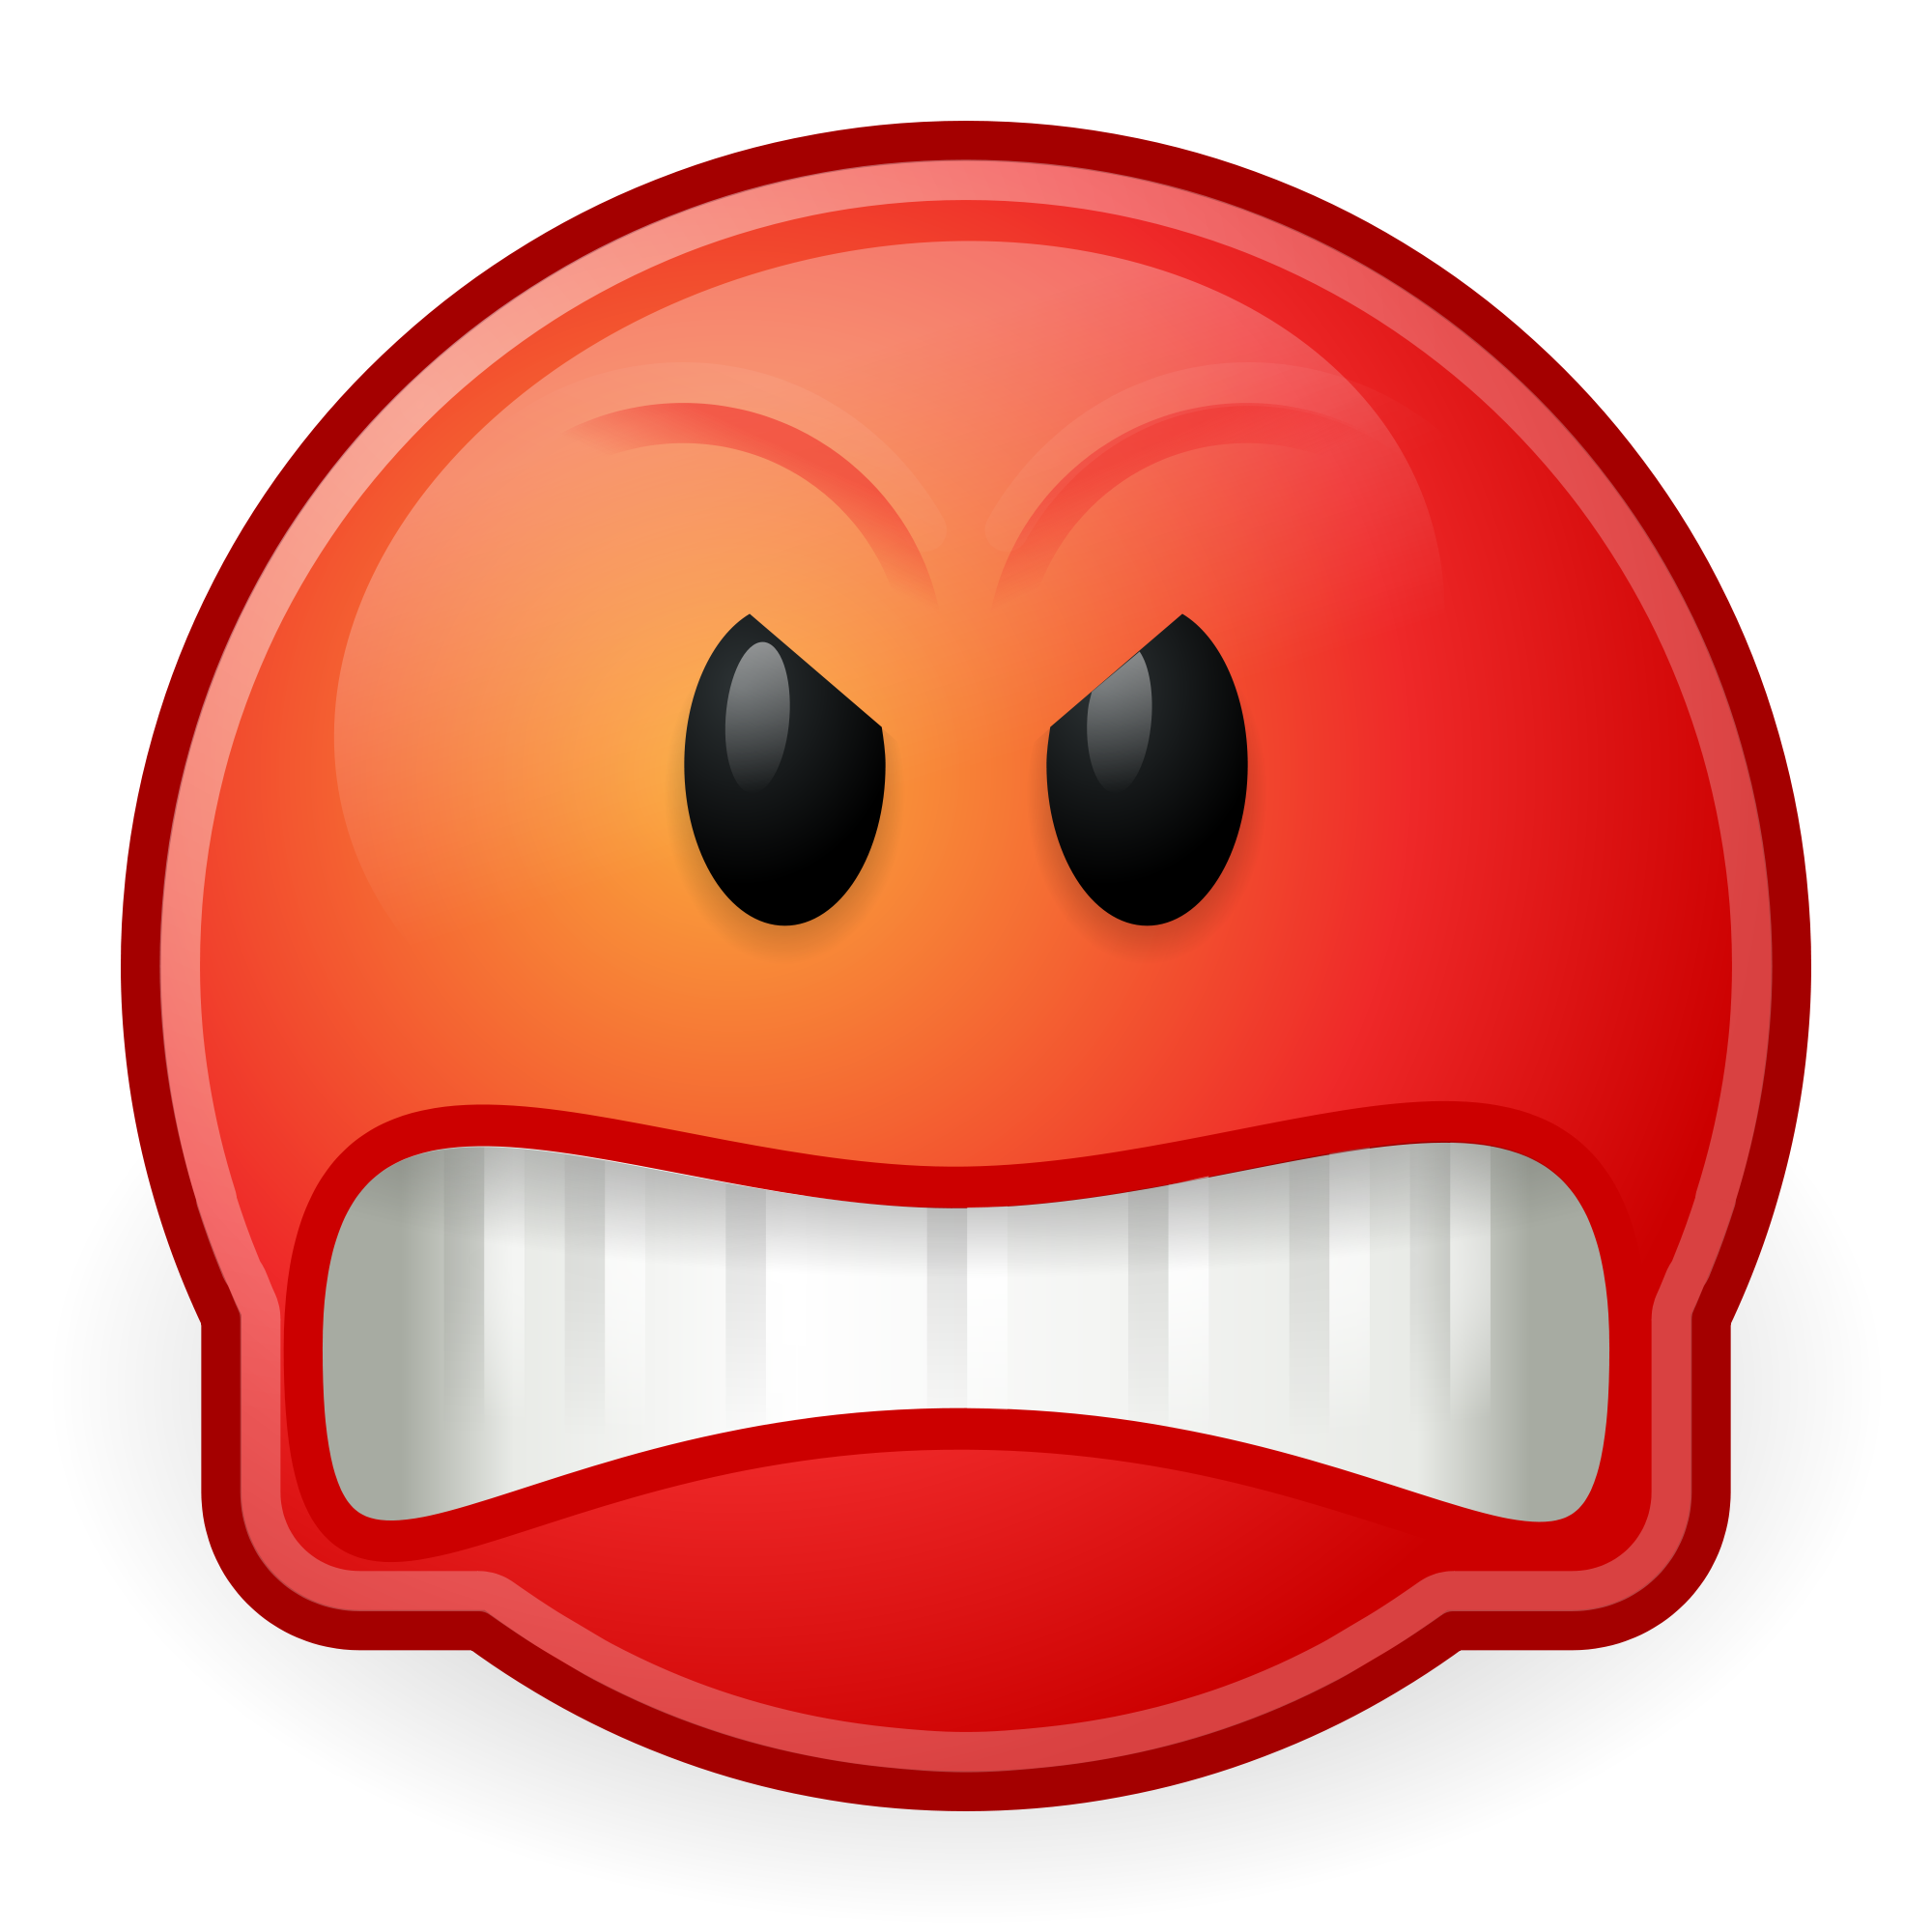 Free Angry Face Pic Download Free Angry Face Pic Png Images Free Cliparts On Clipart Library